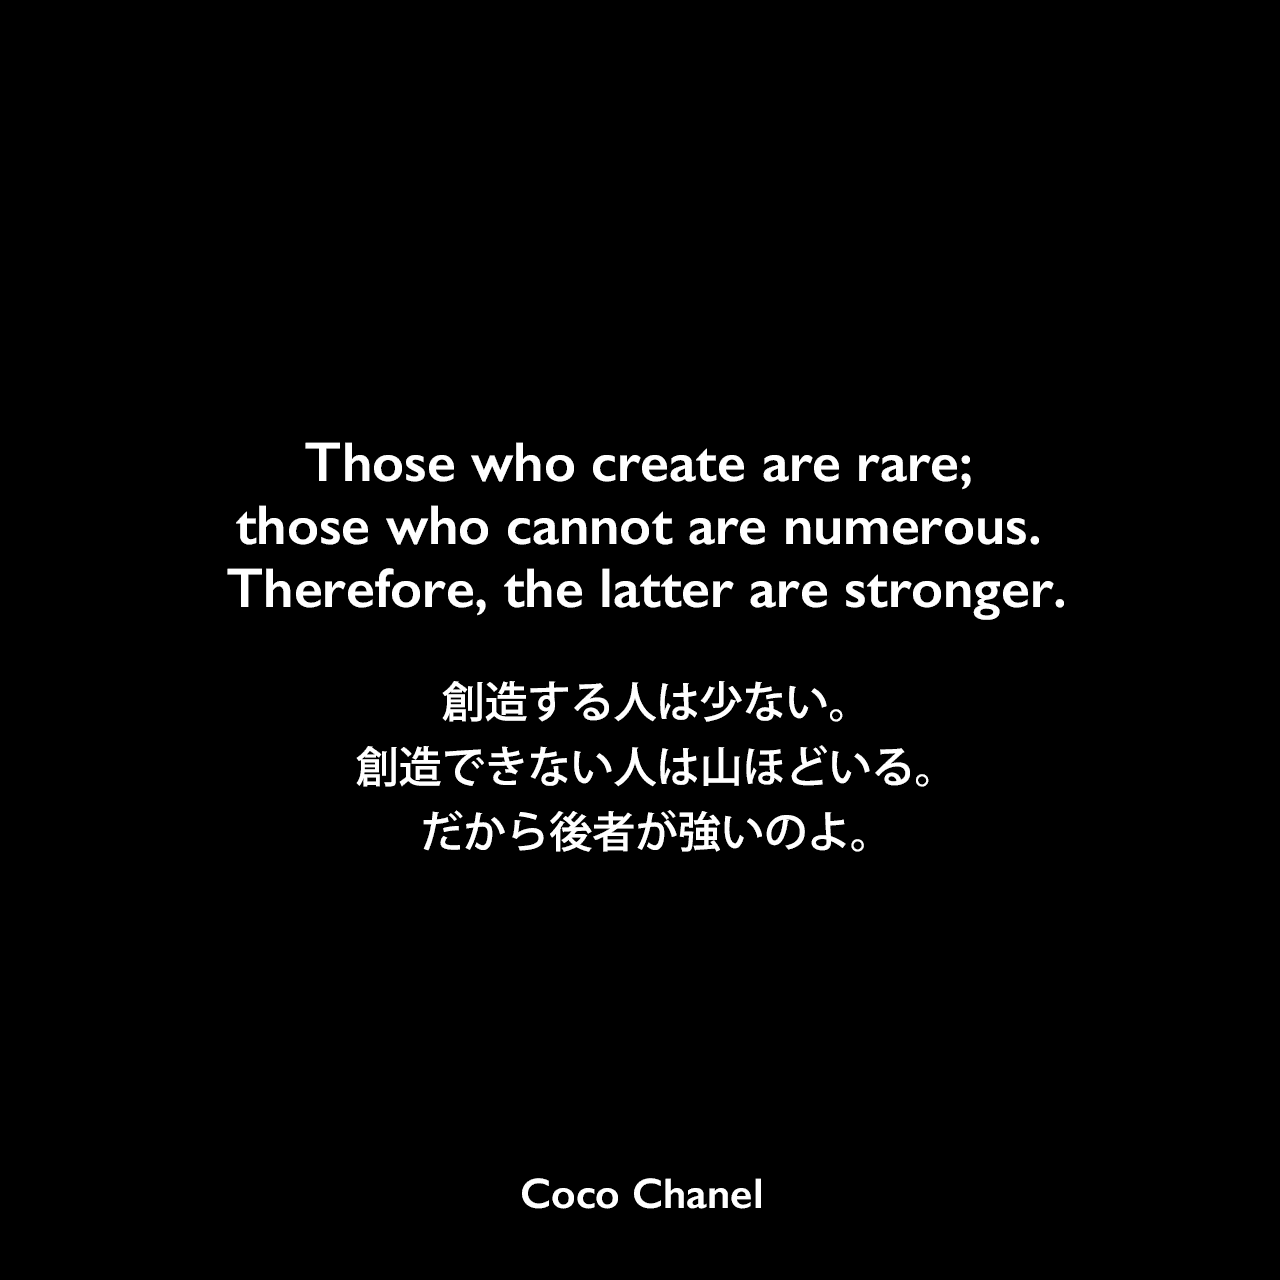 Those who create are rare; those who cannot are numerous. Therefore, the latter are stronger.創造する人は少ない。創造できない人は山ほどいる。だから後者が強いのよ。Coco Chanel